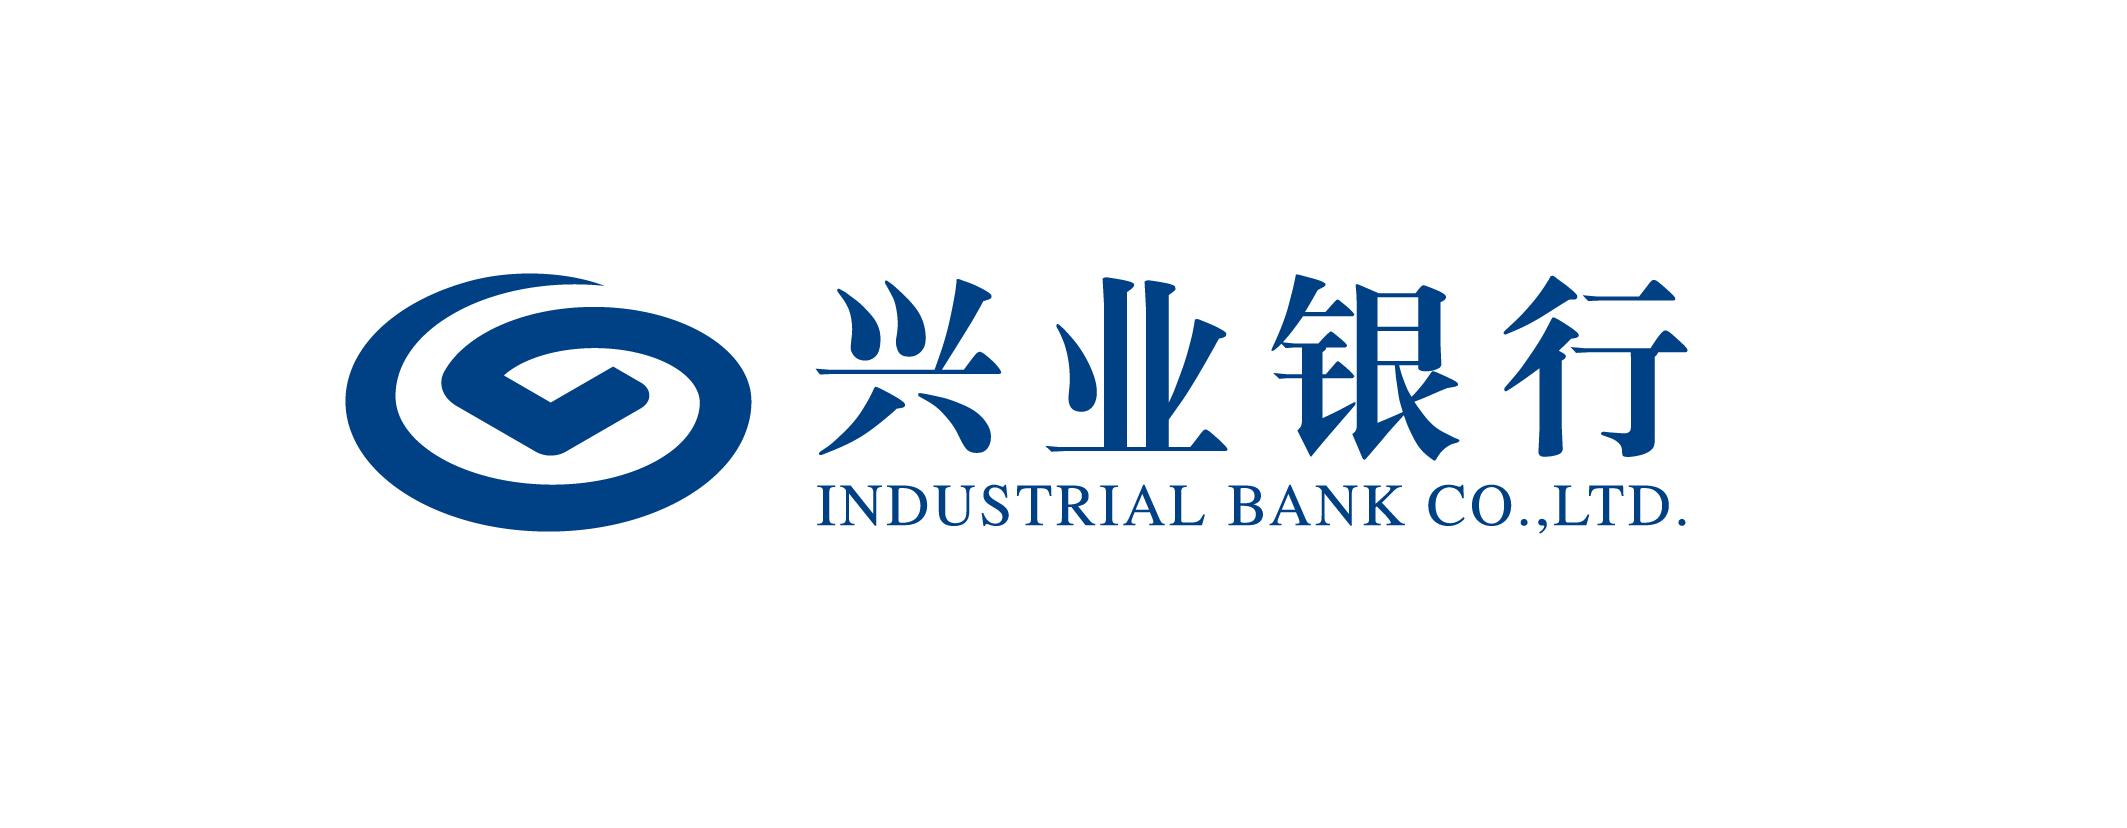 Cnaps bank of china. Industrial Bank. Industrial Bank co. Industrial Bank of Korea. ЕМВ логотип.